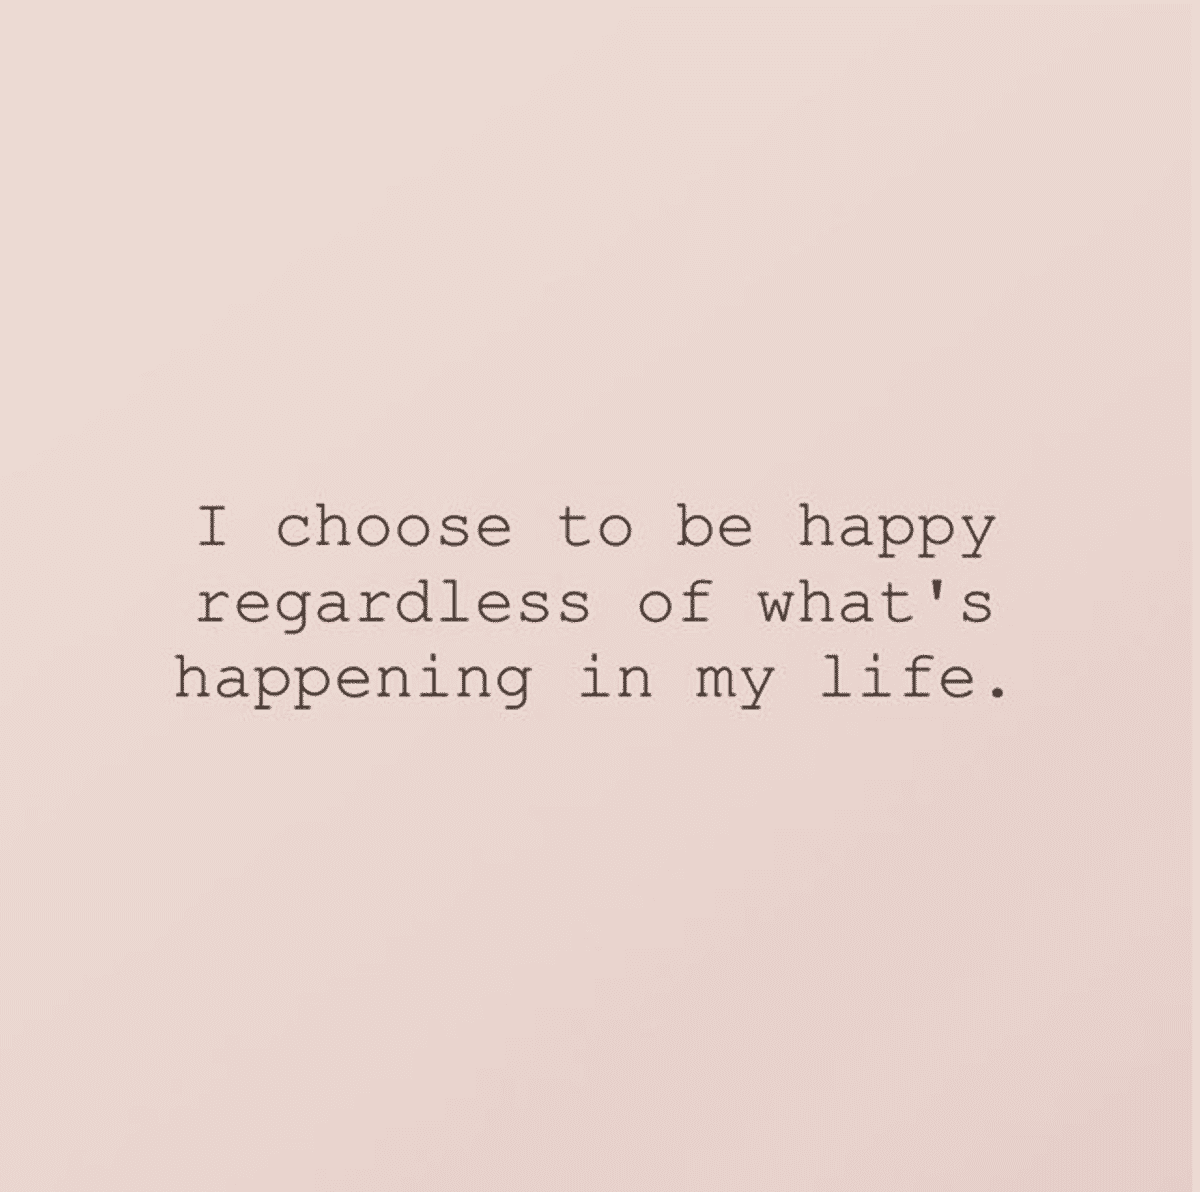 pink background with i choose to be happy affirmation written on it